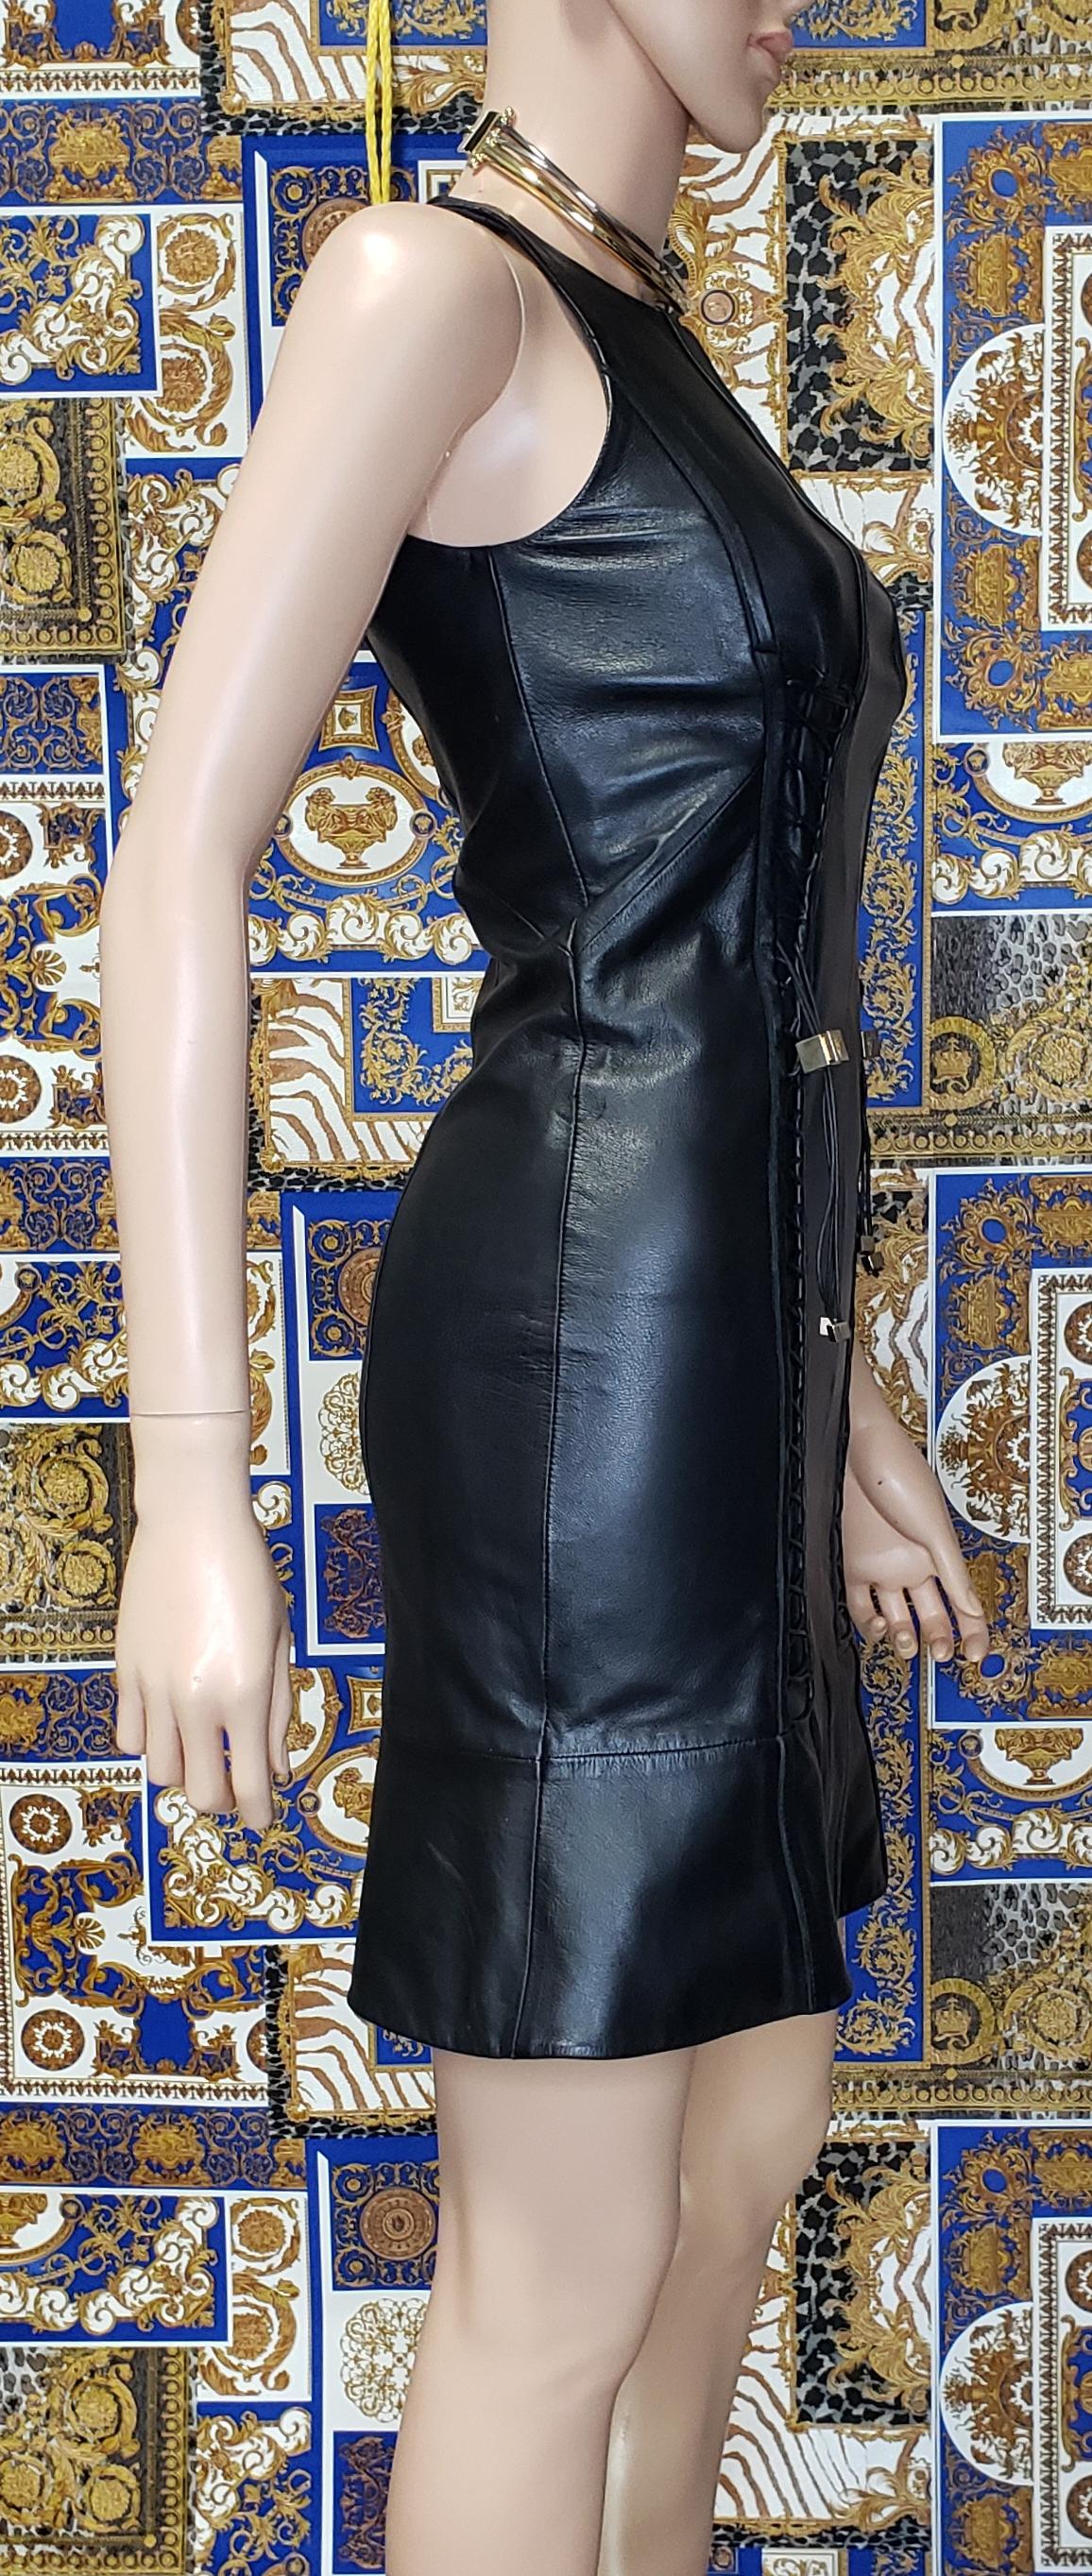 VERSACE BLACK LEATHER DRESS with TASSELS 38 - 4 For Sale 4